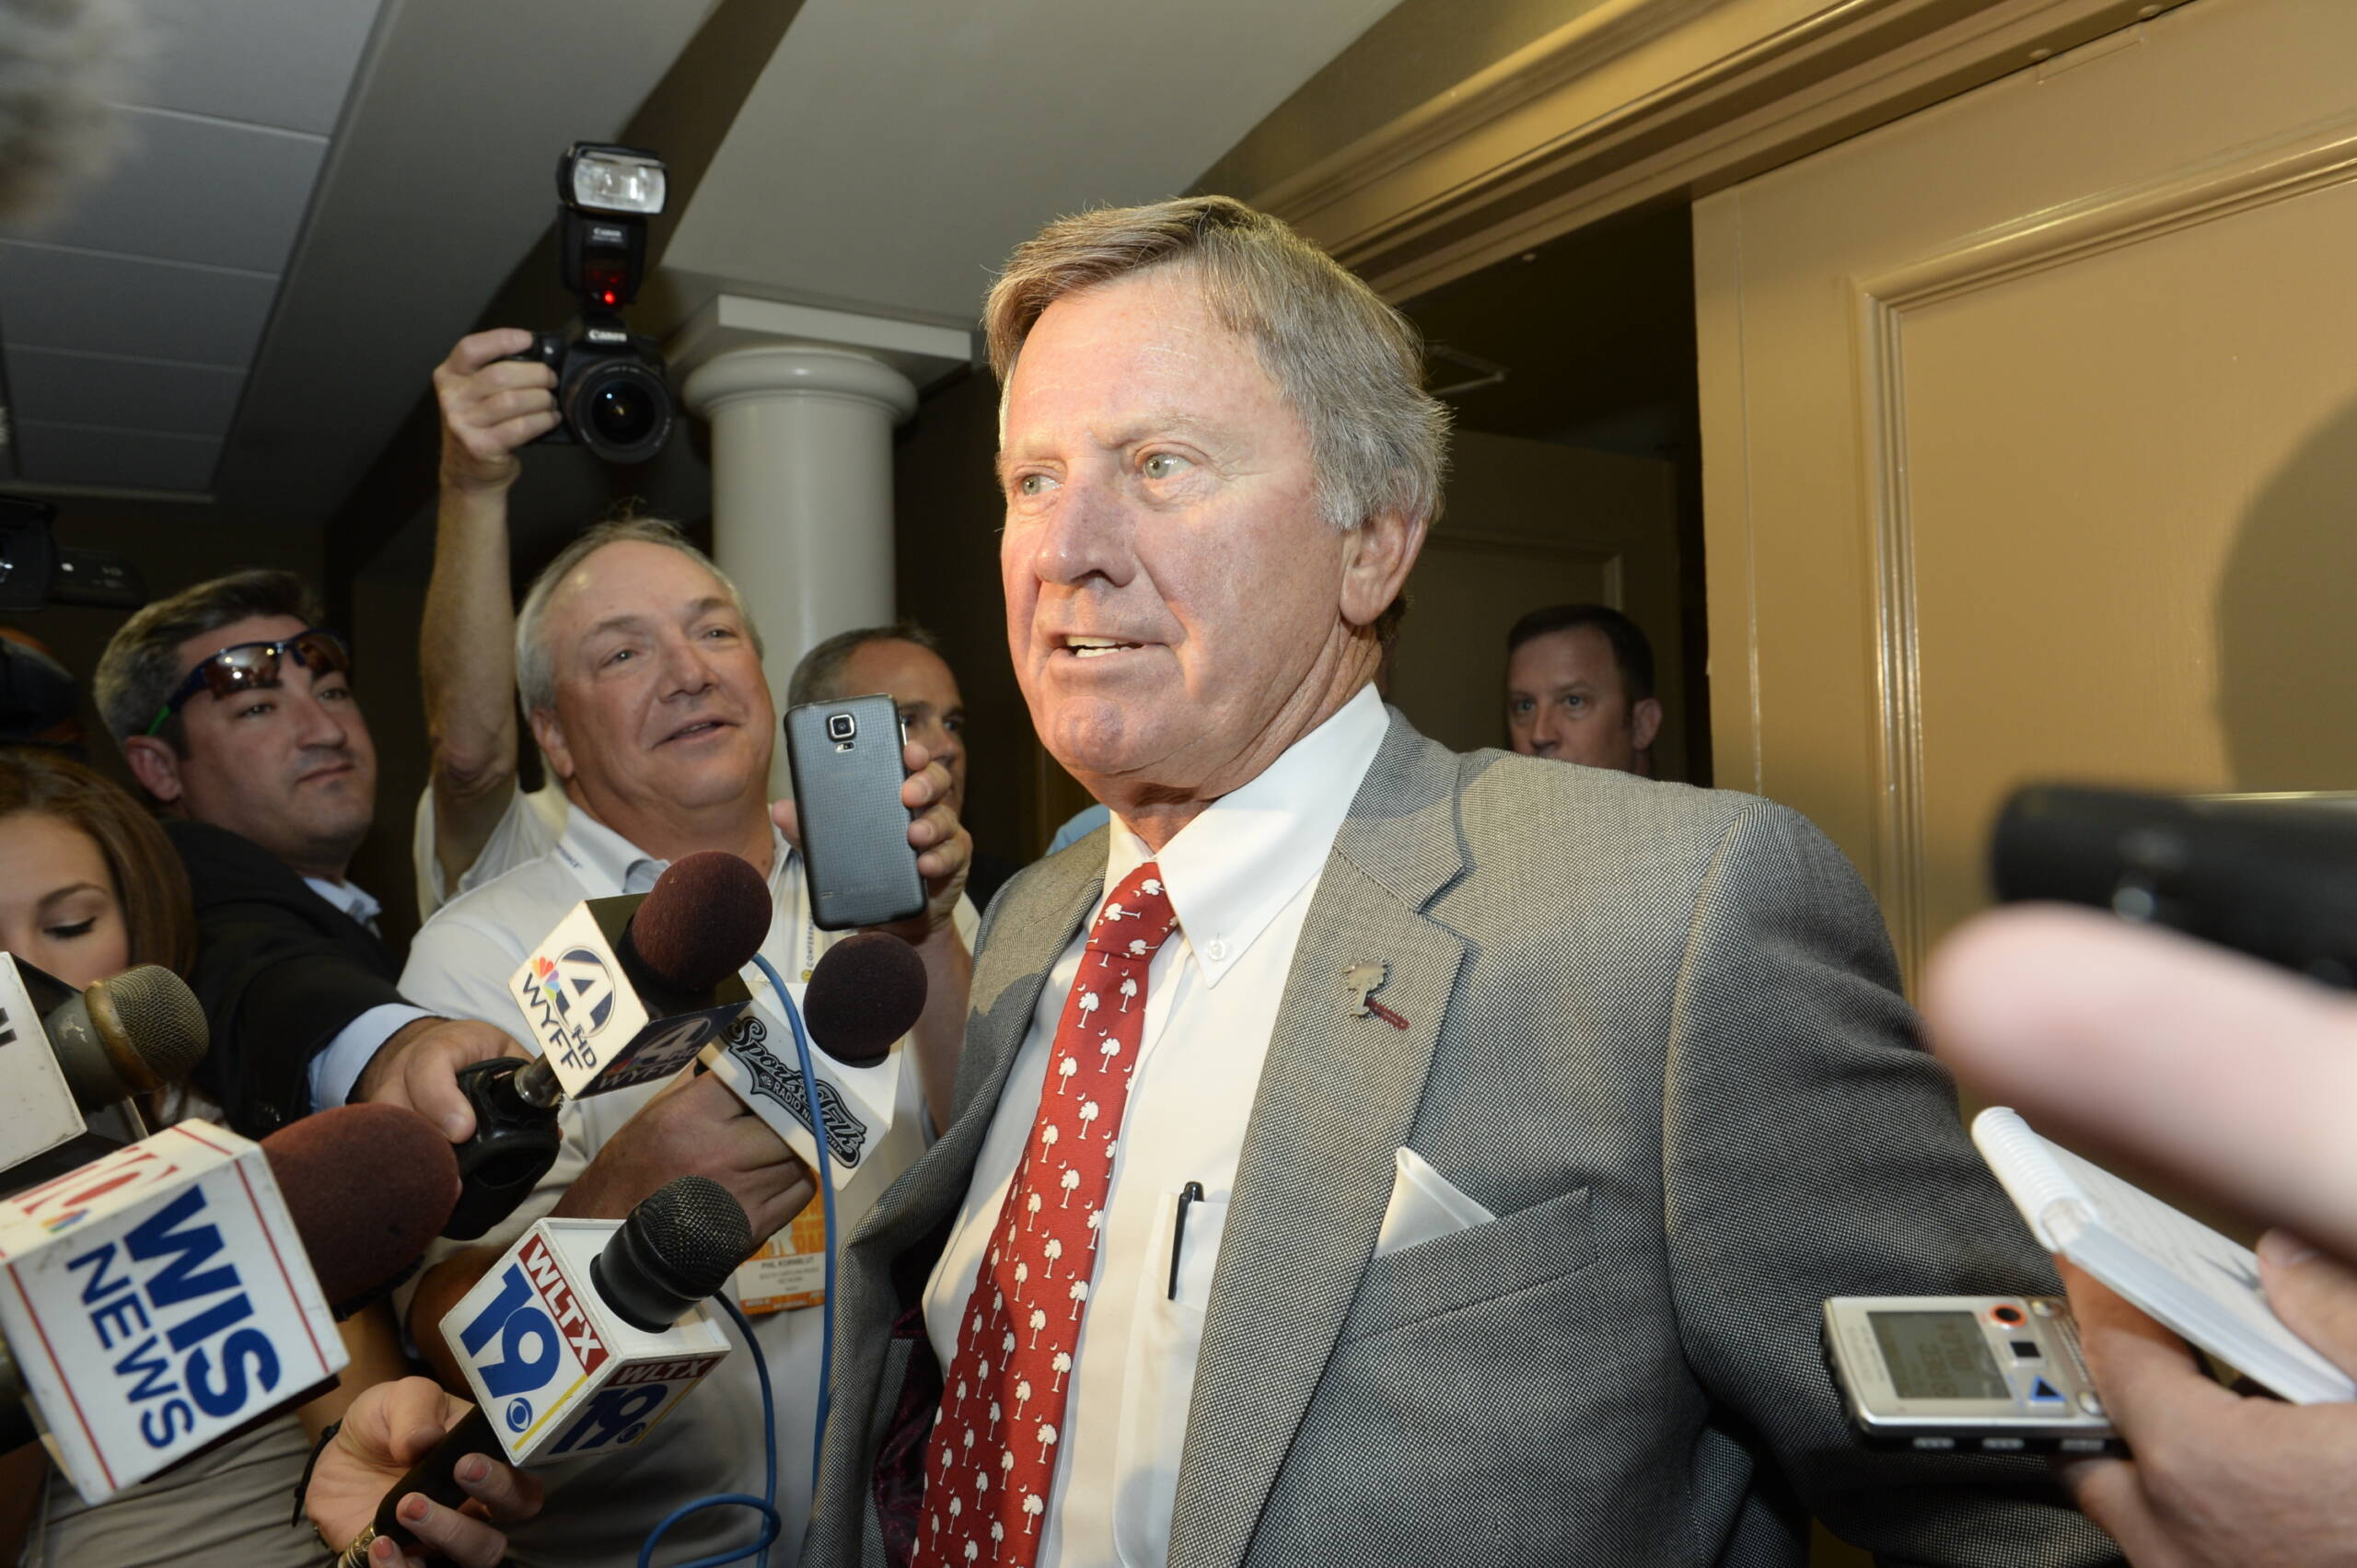 Spurs & Feathers exclusive interview with Steve Spurrier